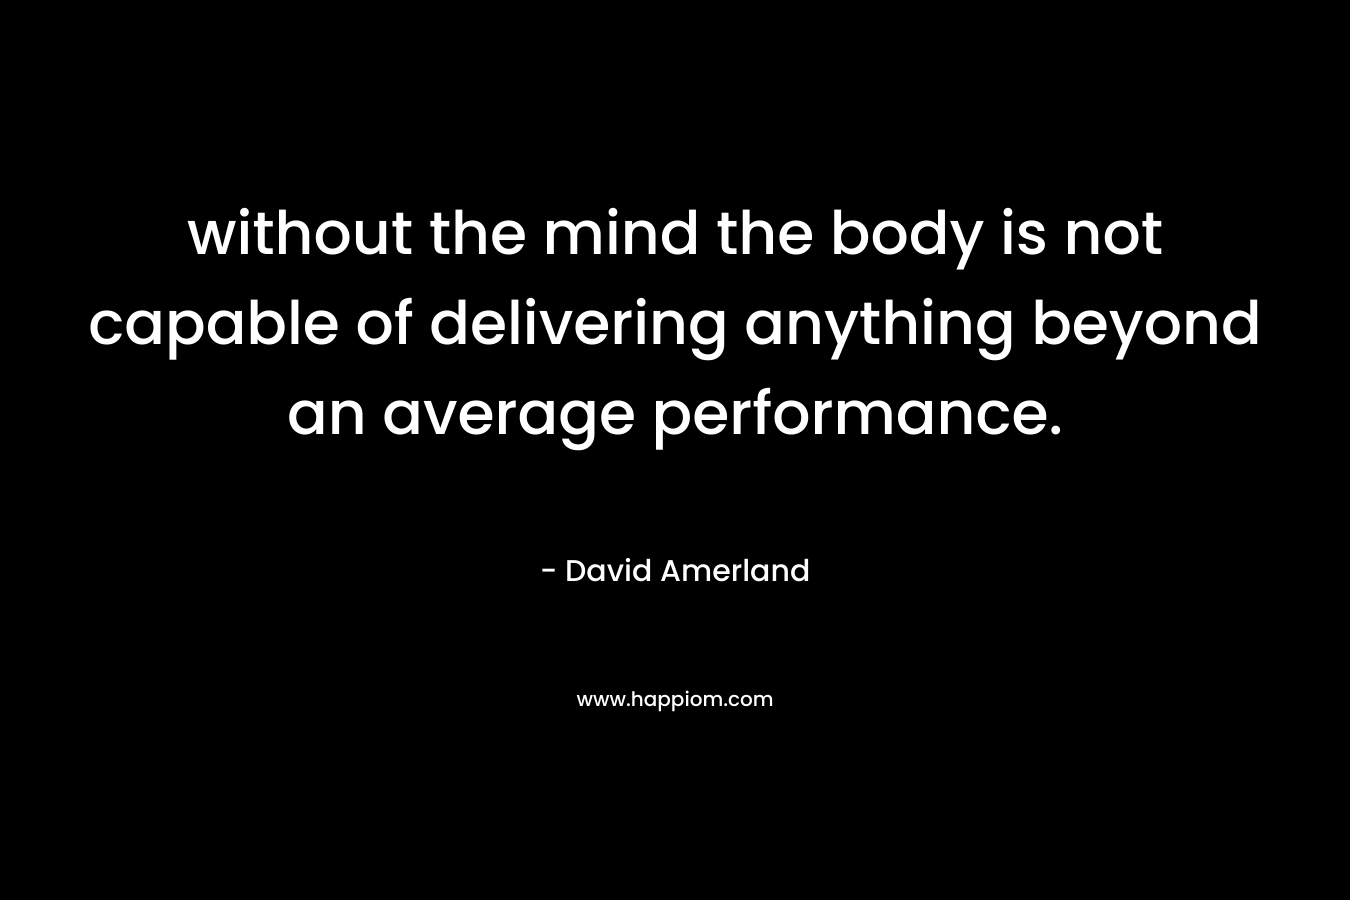 without the mind the body is not capable of delivering anything beyond an average performance.